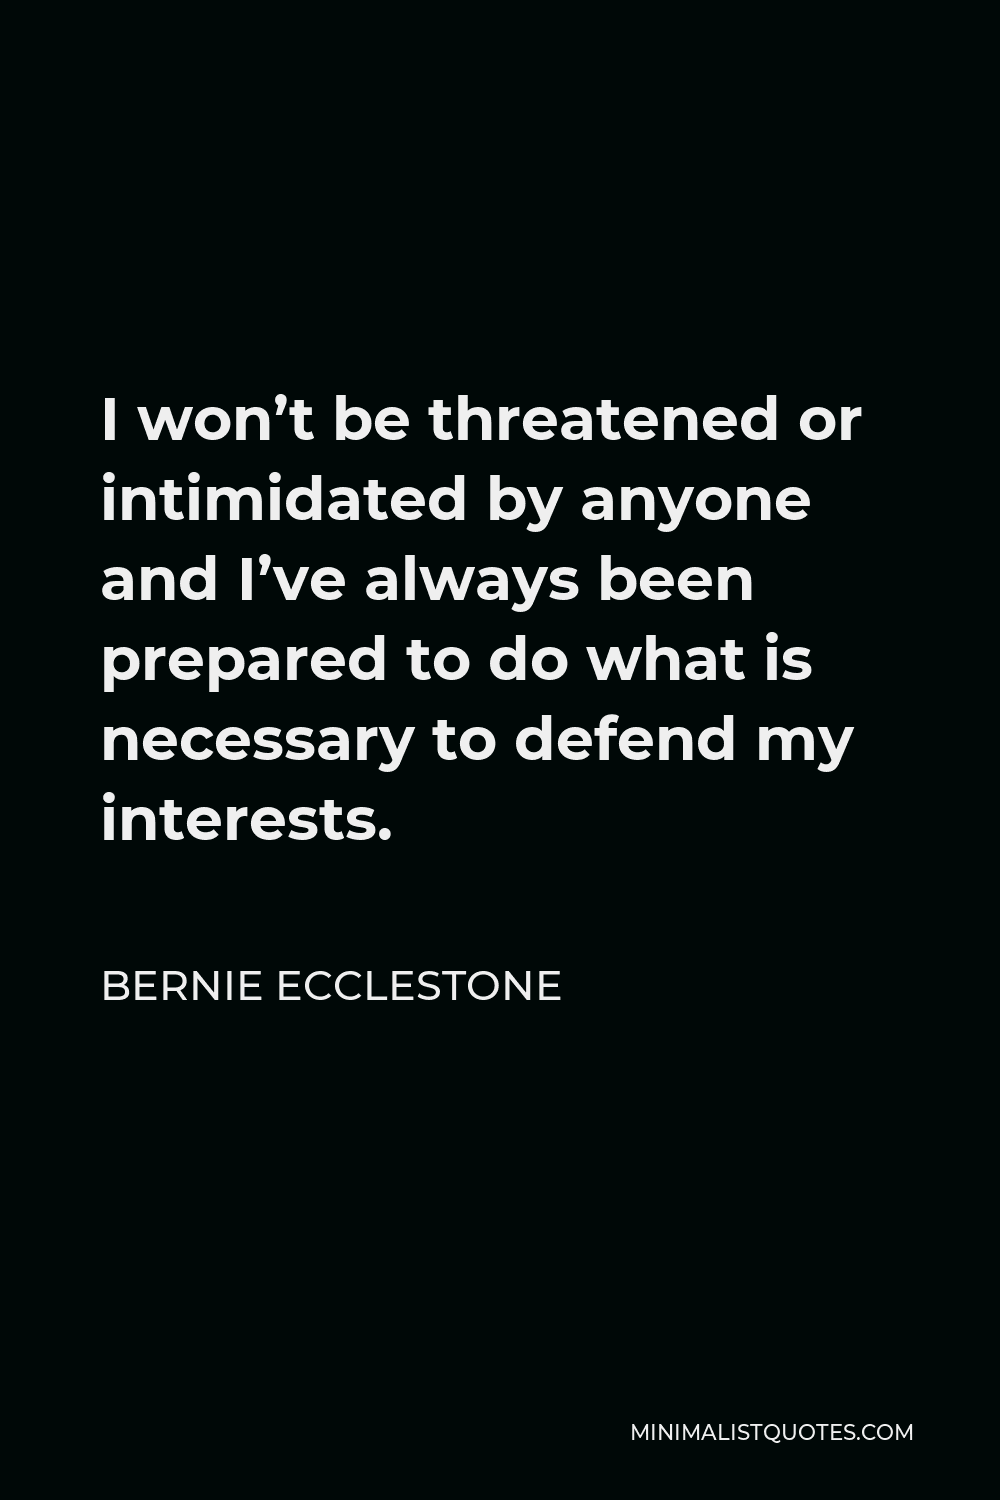 Bernie Ecclestone Quote - I won’t be threatened or intimidated by anyone and I’ve always been prepared to do what is necessary to defend my interests.